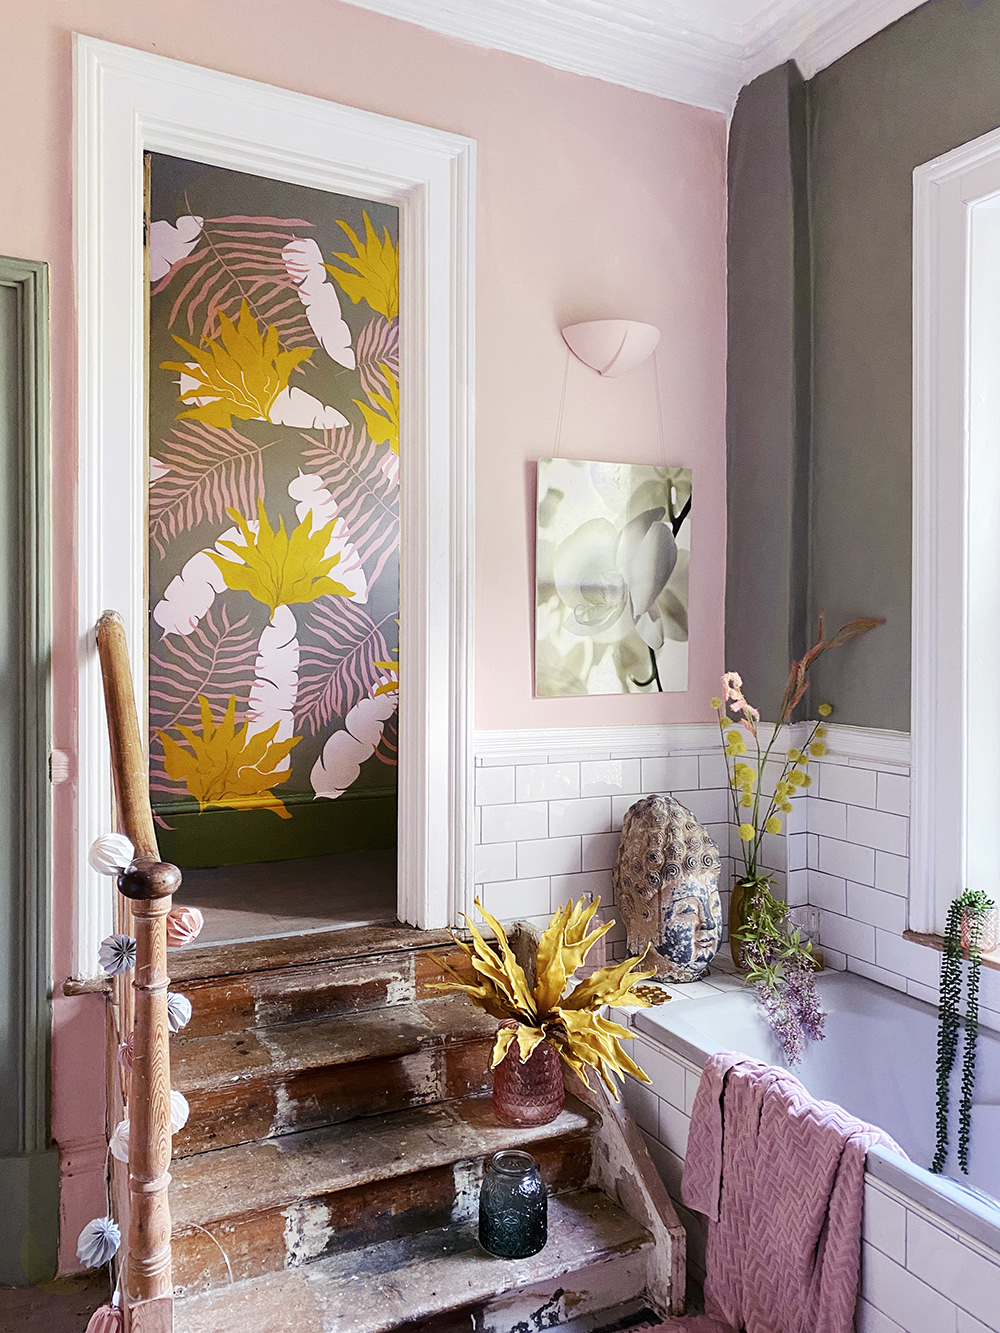 Blush pink bathroom with colourful wall murals